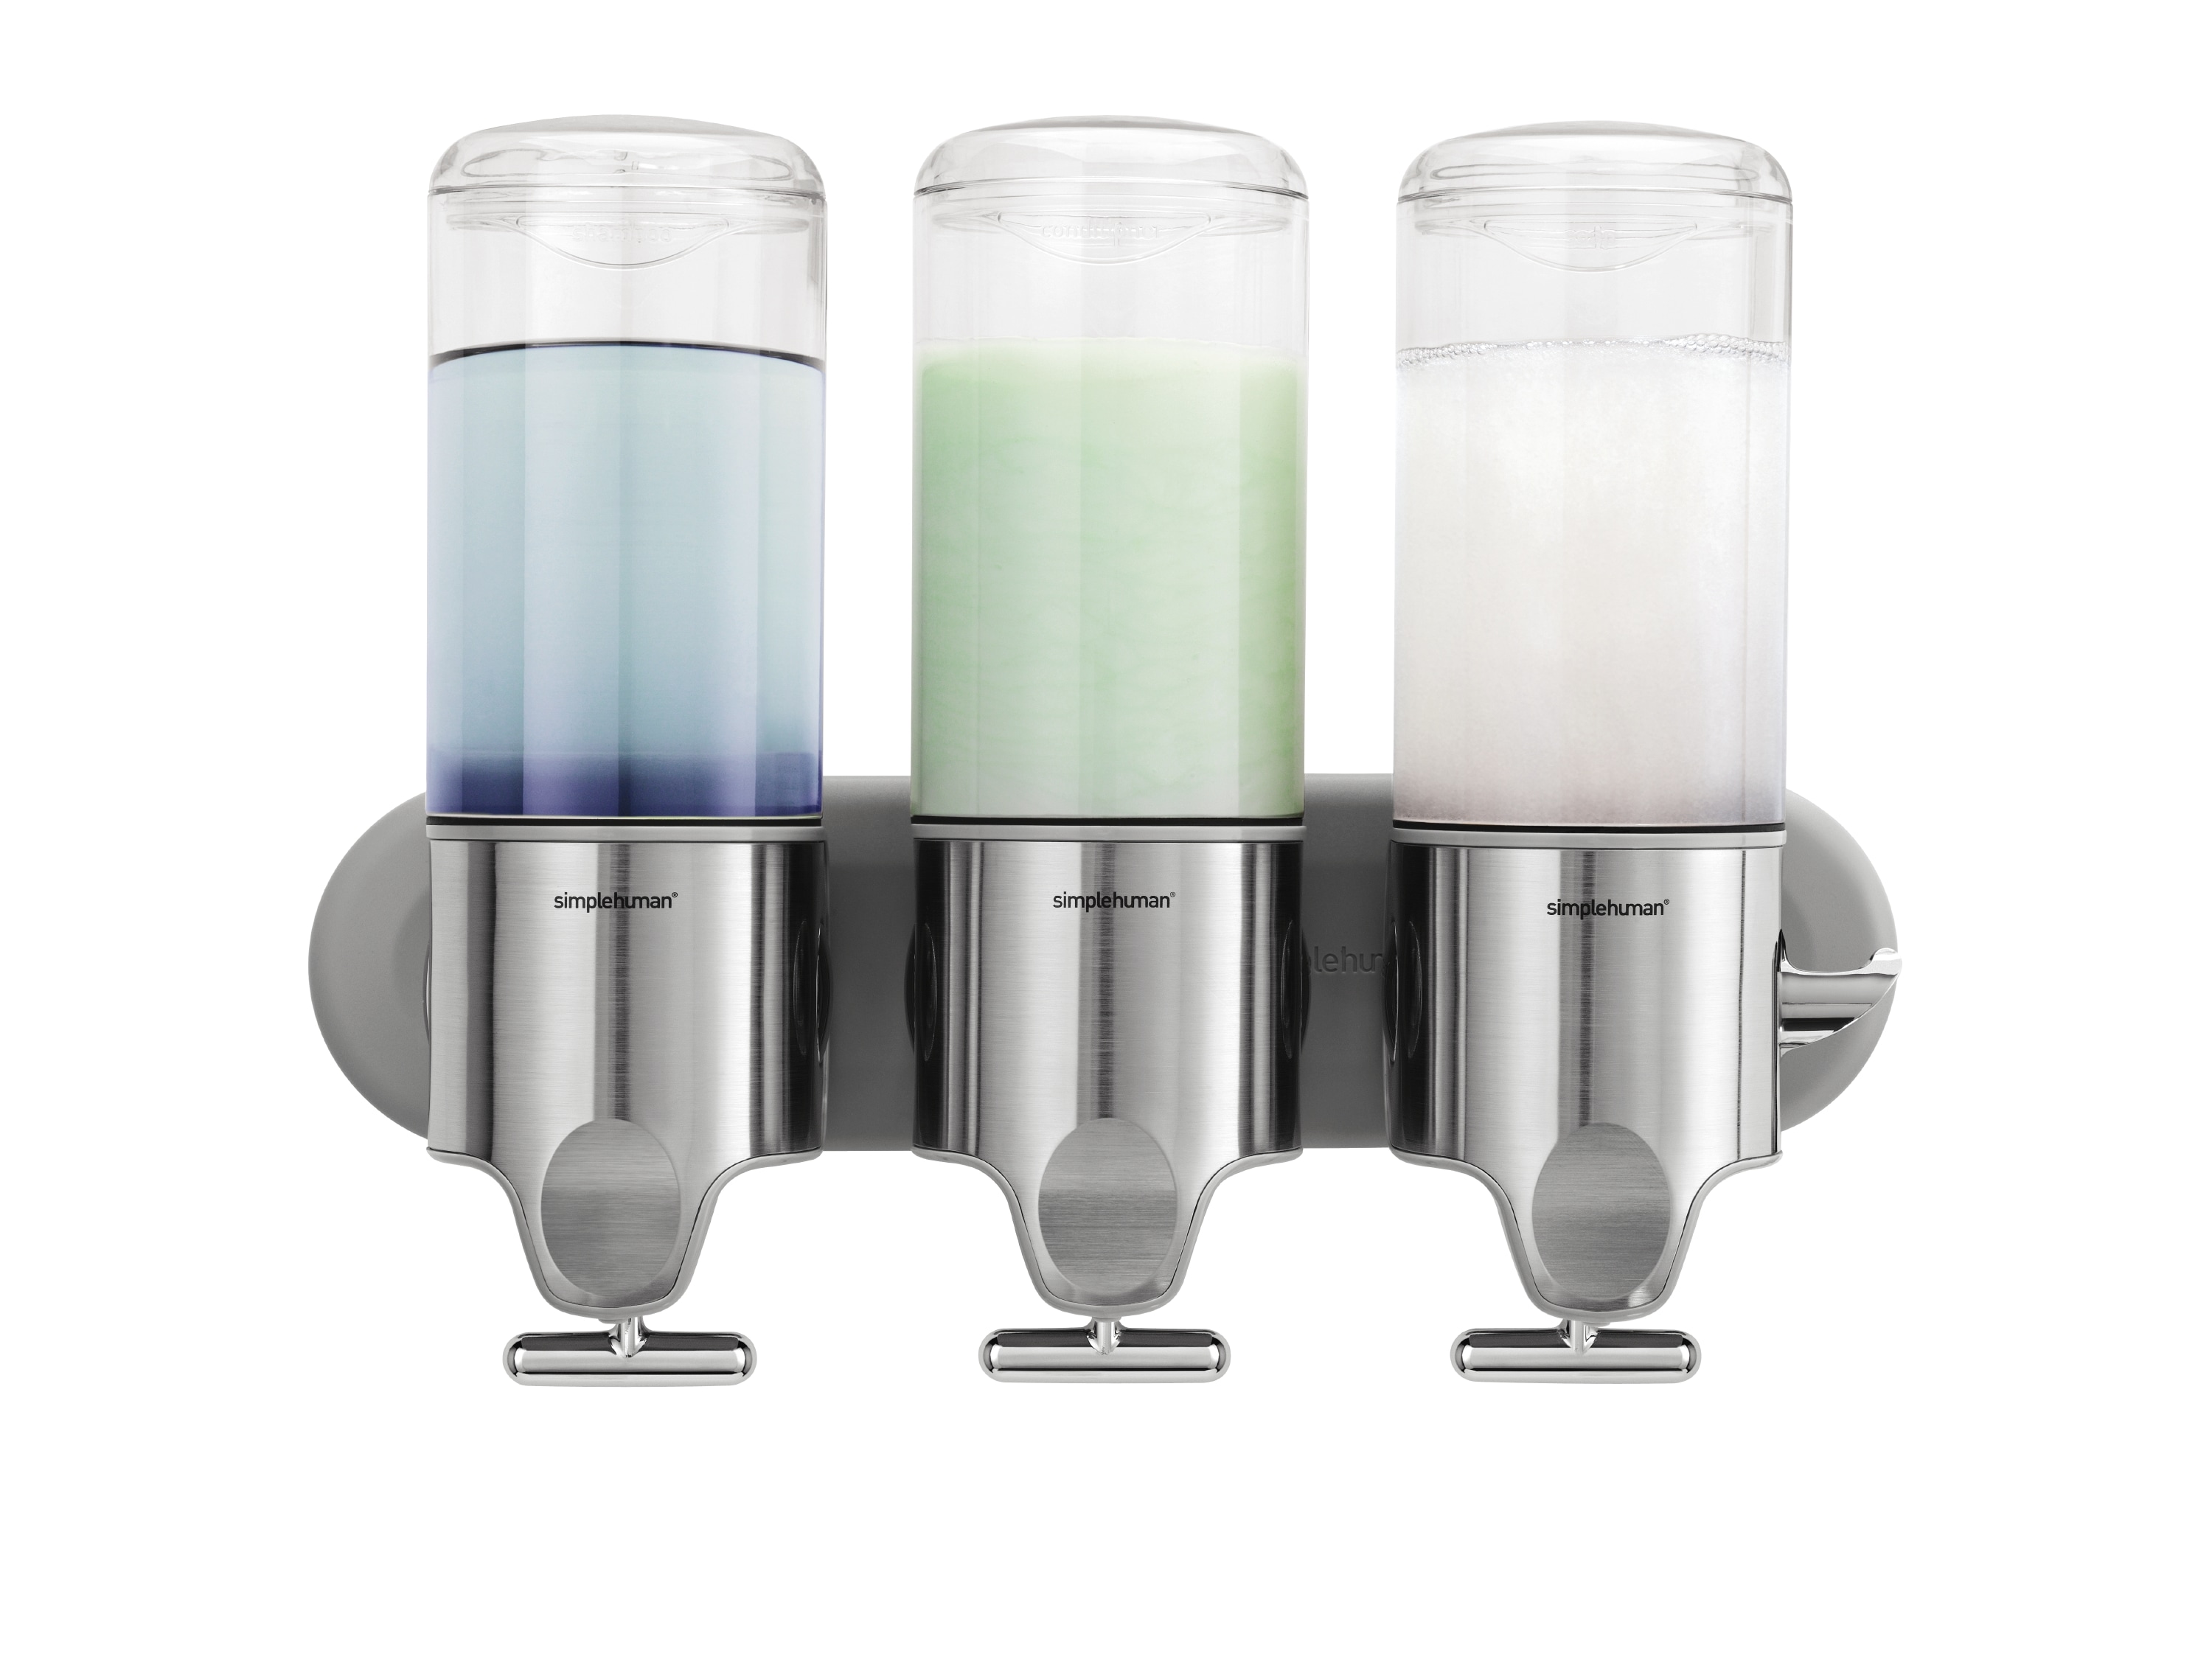 simplehuman Soap Dispenser and Caddy